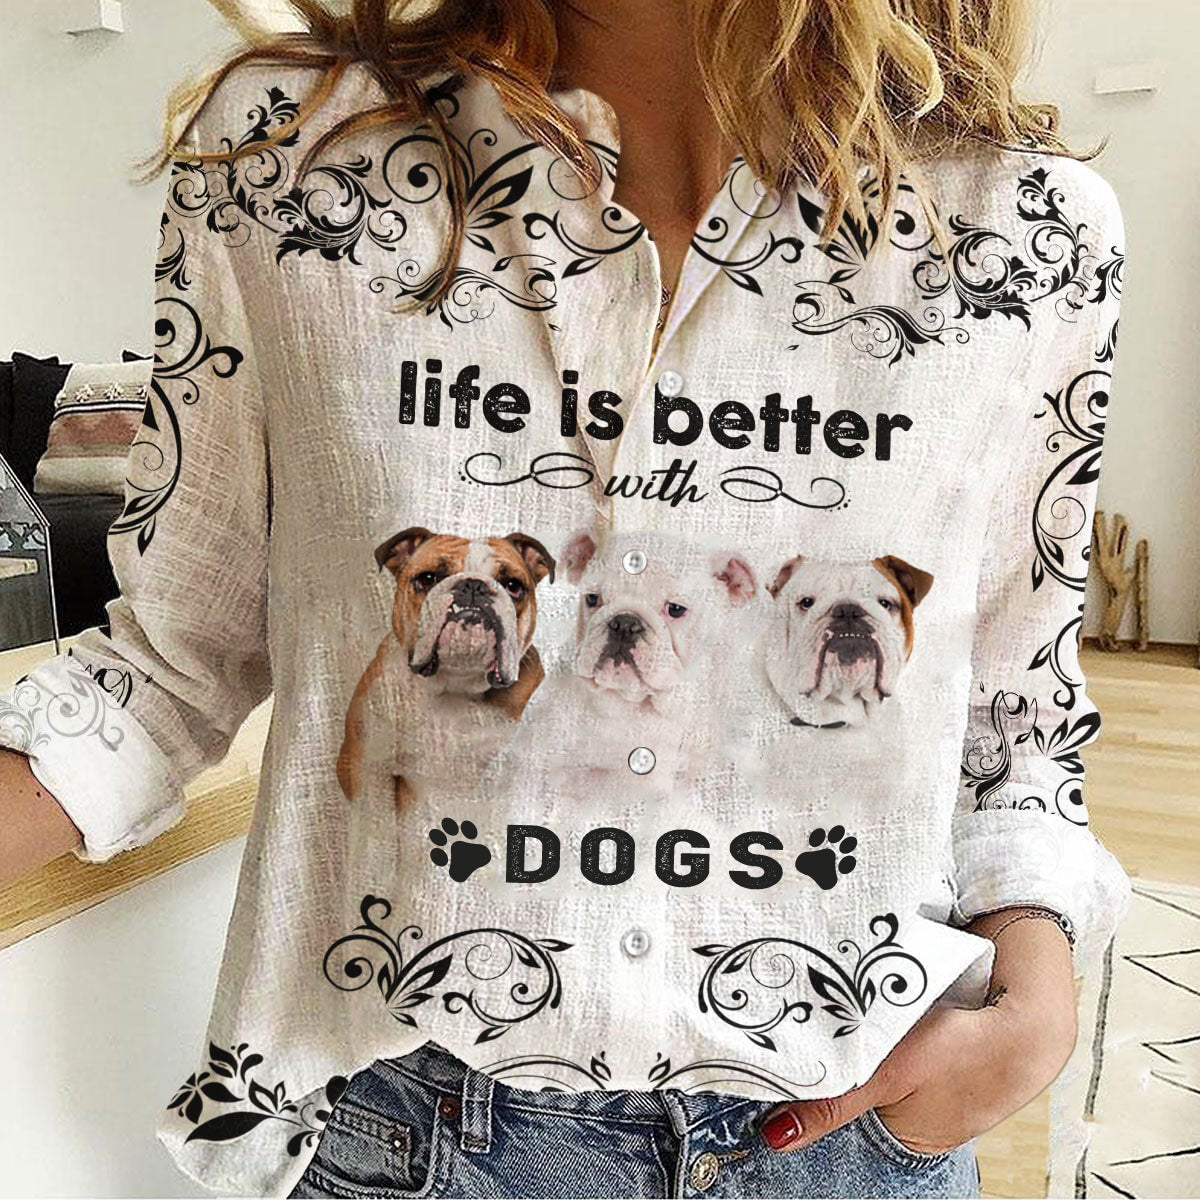 Bulldog -Life Is Better With Dogs Women's Long-Sleeve Shirt